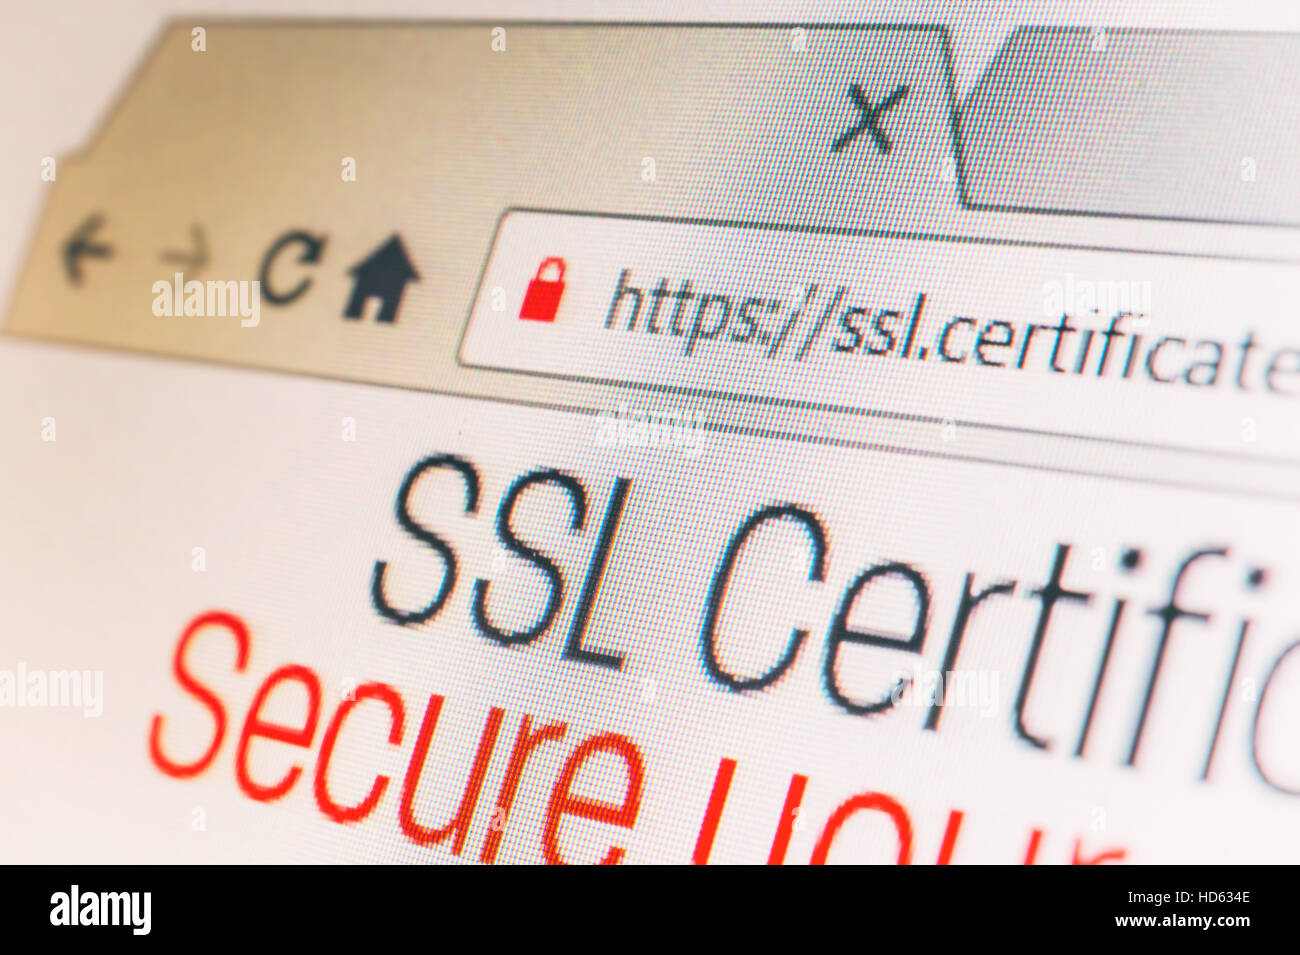 Https url address and lock symbol during SSL connection Stock Photo